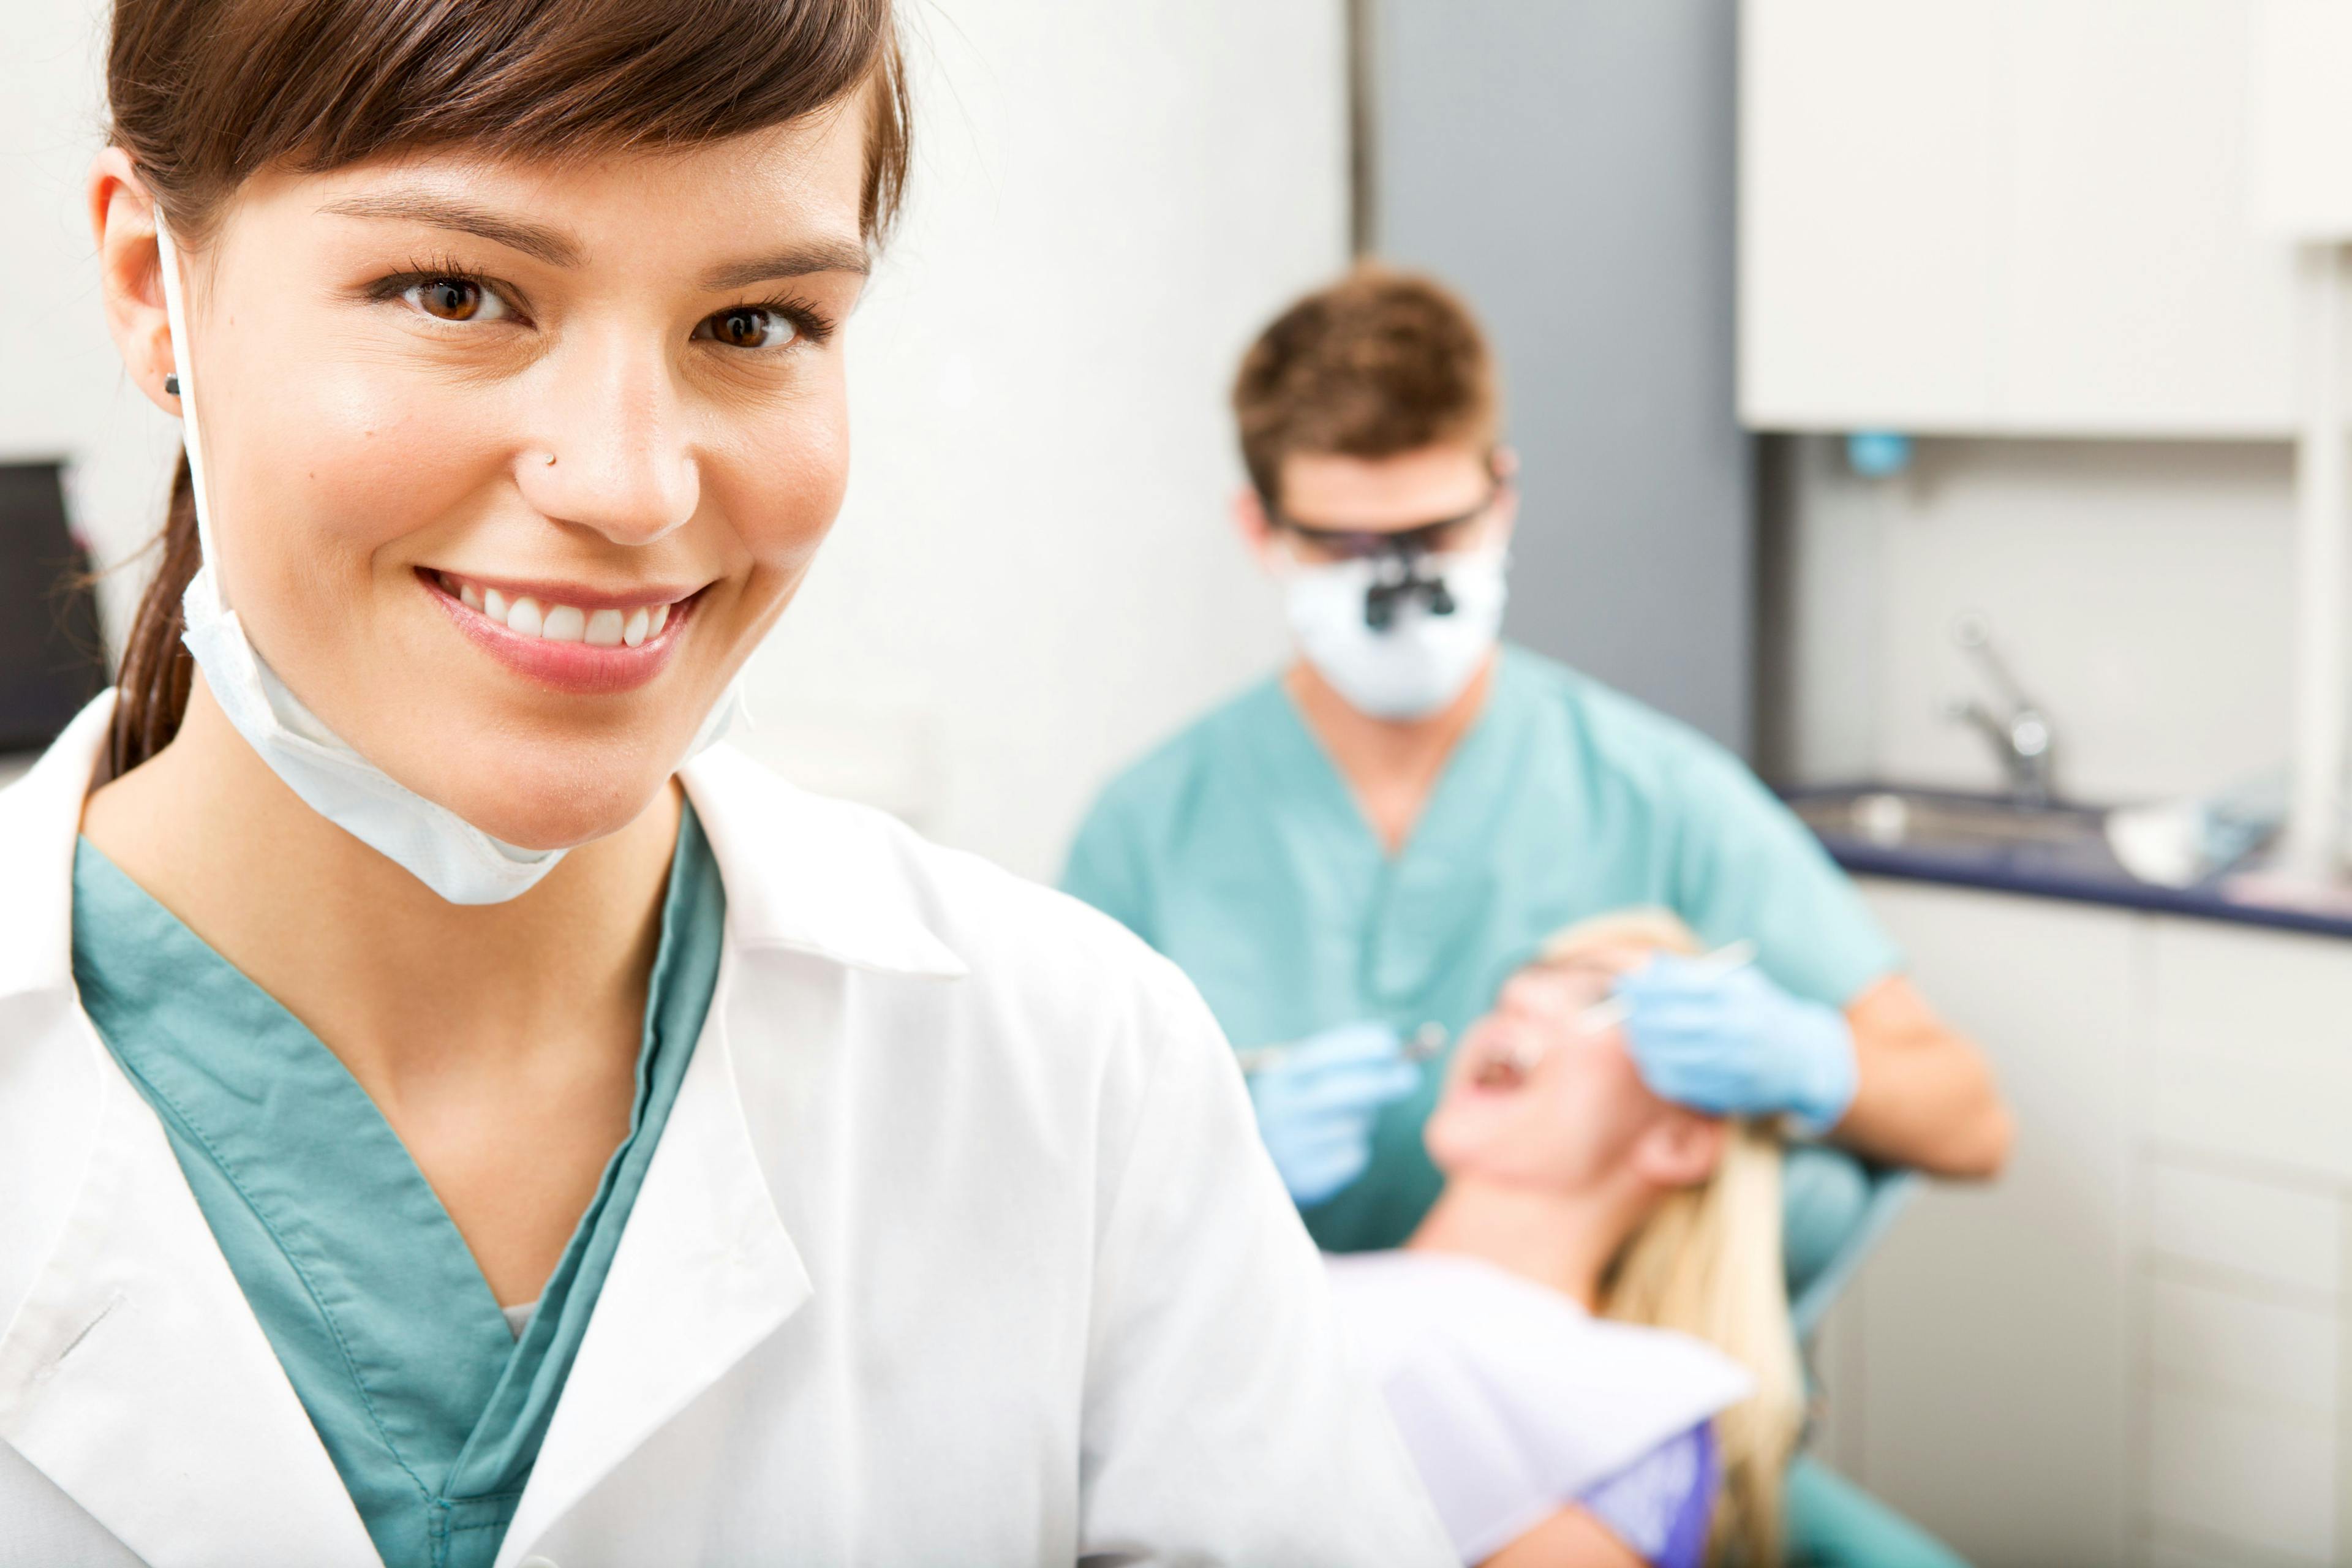 A dental hygienist smiles happily as the dentist checks the patient